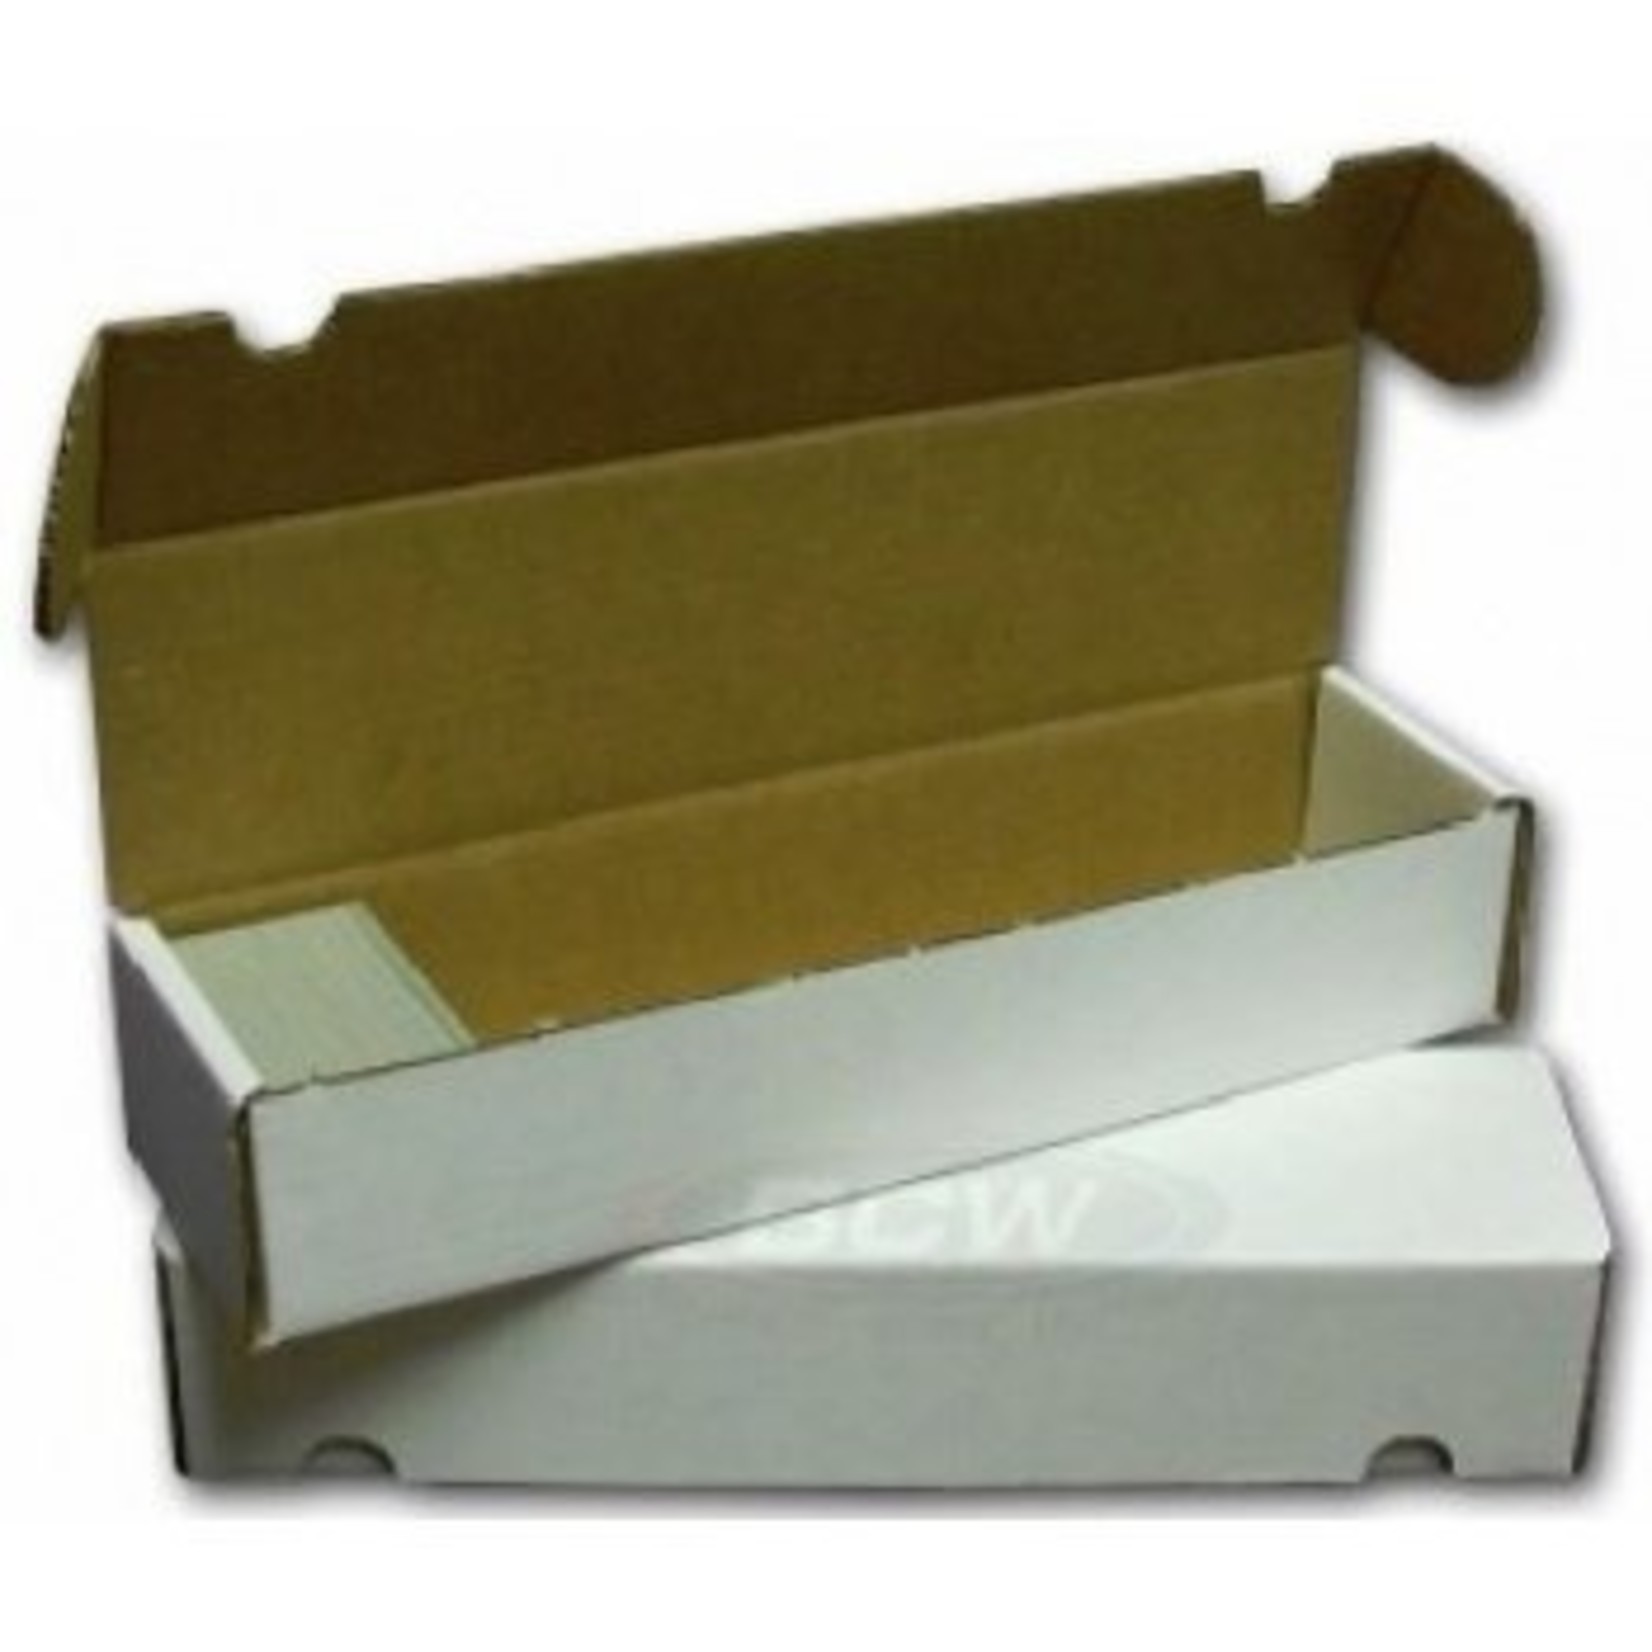 Cartonboxes Cardbox / Fold-out Box for Storage of 1.000 Cards